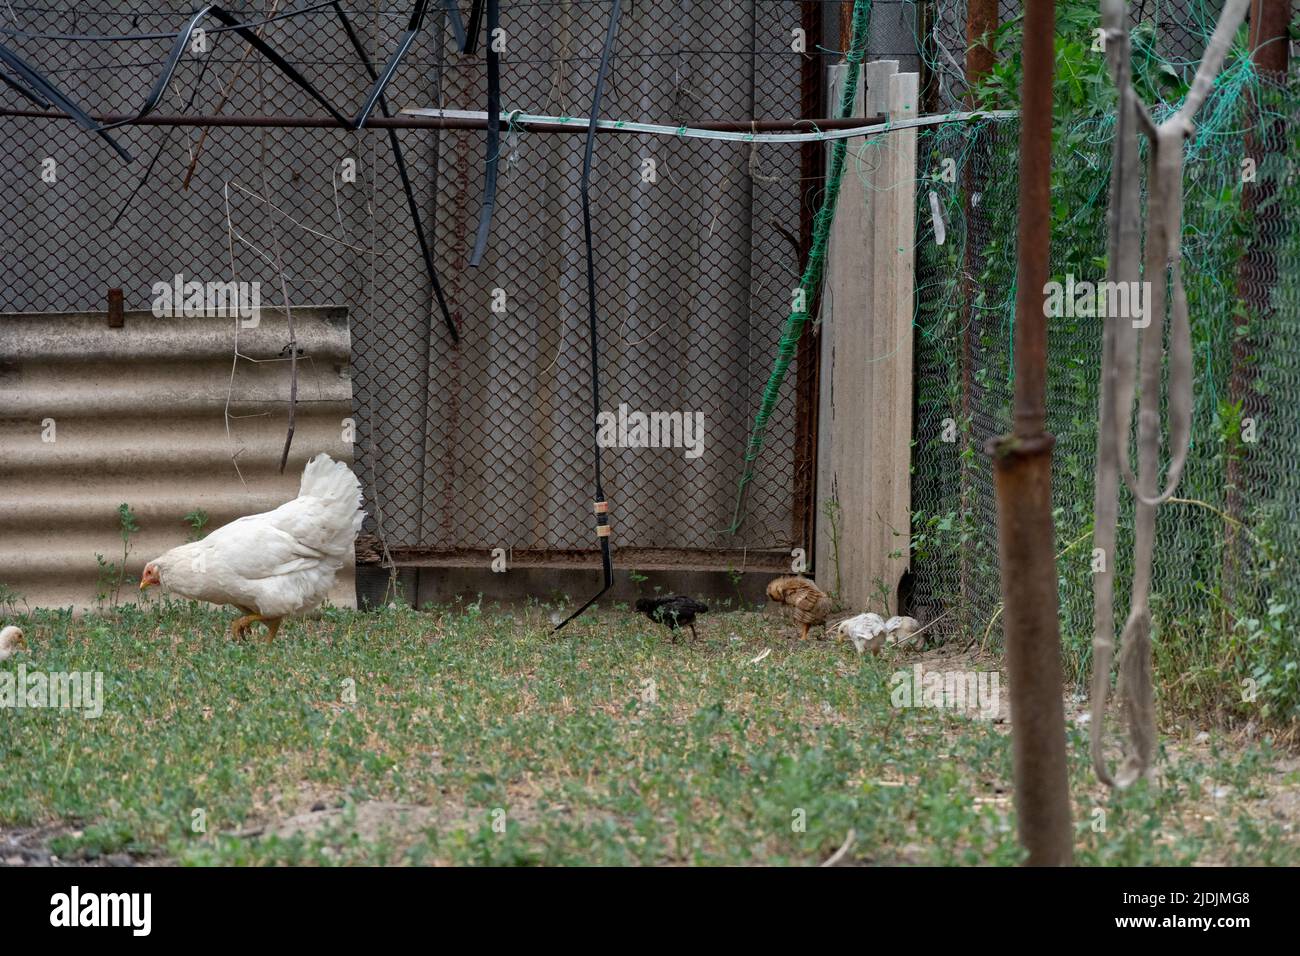 Chickens and a hen walk on the grass in the backyard of a home farm. Focus on black chick Stock Photo